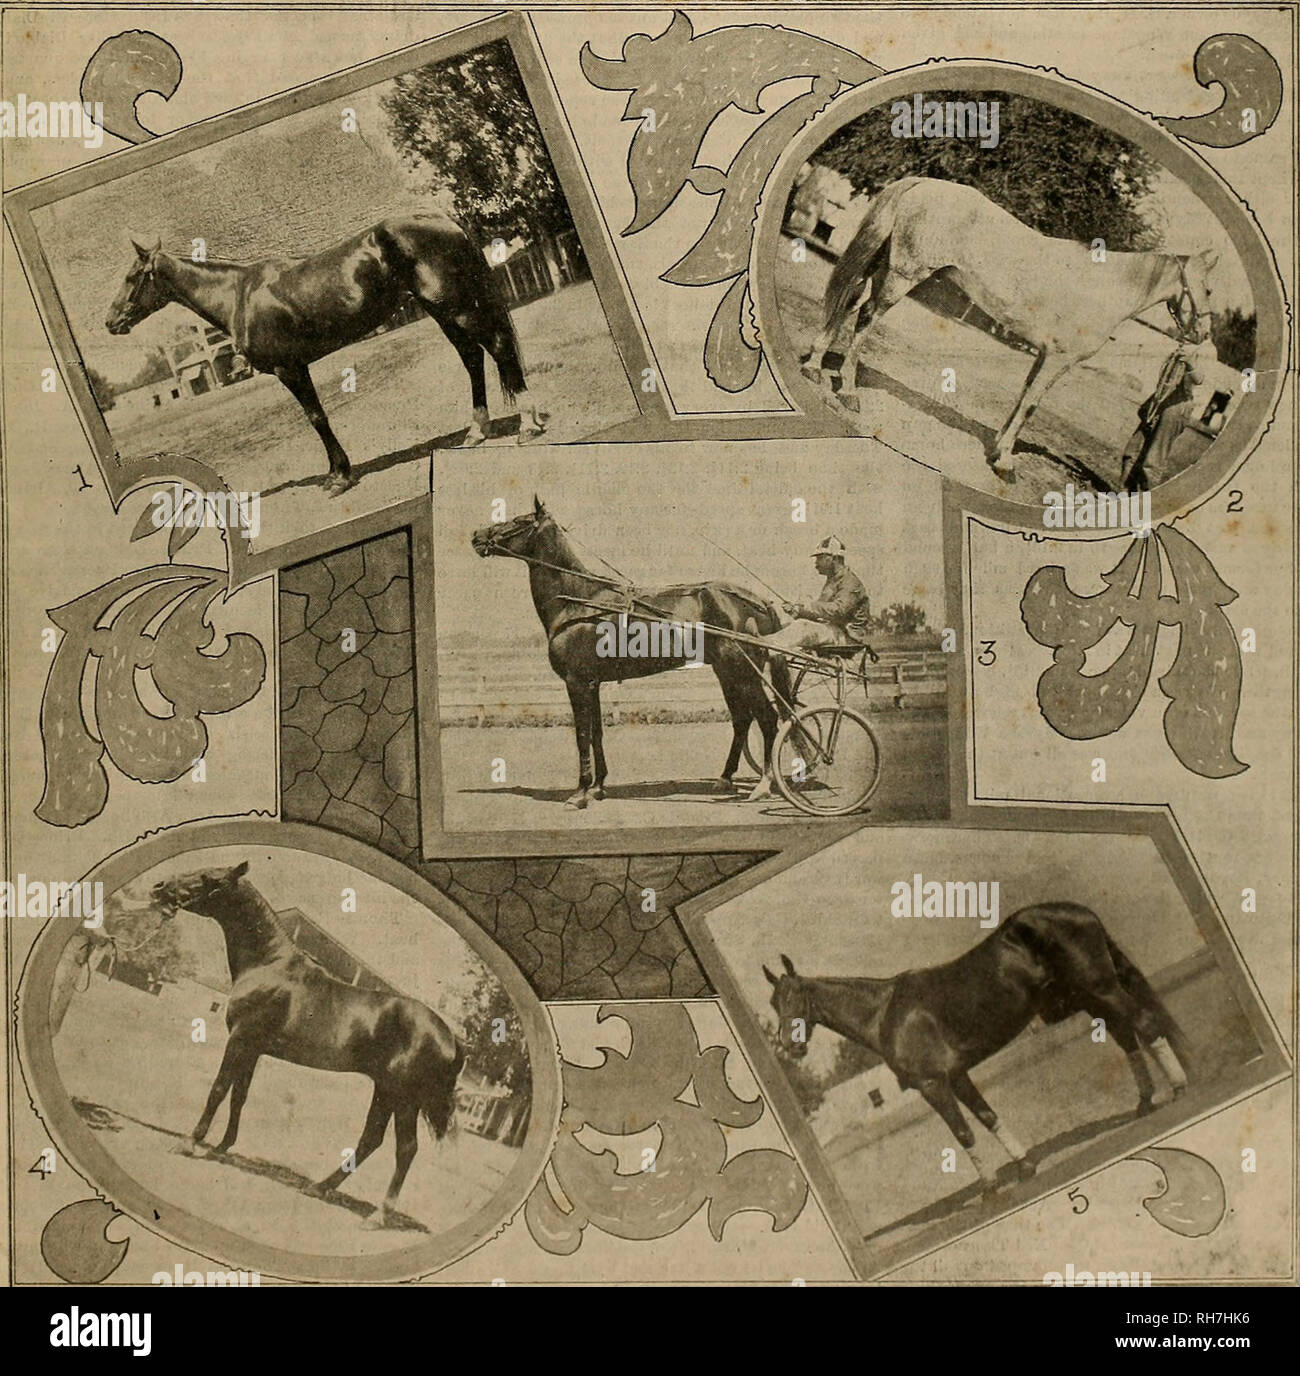 . Breeder and sportsman. Horses. VOL. XXIX. No. 6. 36 GEARY STREET. SAN FRANCISCO, SATURDAY, AUGUST 10, 1901. SUBSCRIPTION THREE DOLLARS A YEAR. SOME OF THE MONEY WINNERS AT SACRAMENTO. 1. Anzeila2:J3!4, b. m. by Antrim, winner of 2:14 trot. 2. What Is It 2:16a, g. R. by Direct, wlnnor of 2:40 trot. :i Sir Albert S. 2:H*34. by I&gt;i;ibln wlnnor of 2:25 and 2:17 class pacing events, 4. Freddie C, blk. s. by Direct, beaten a half length in 8:1134; winner of second money In 2:17 pace. 5. Ned Thome9H1Hi b. p. by Billy Thnrnhlll. second In 2:11 tr..'. Please note that these images are extracted fr Stock Photo